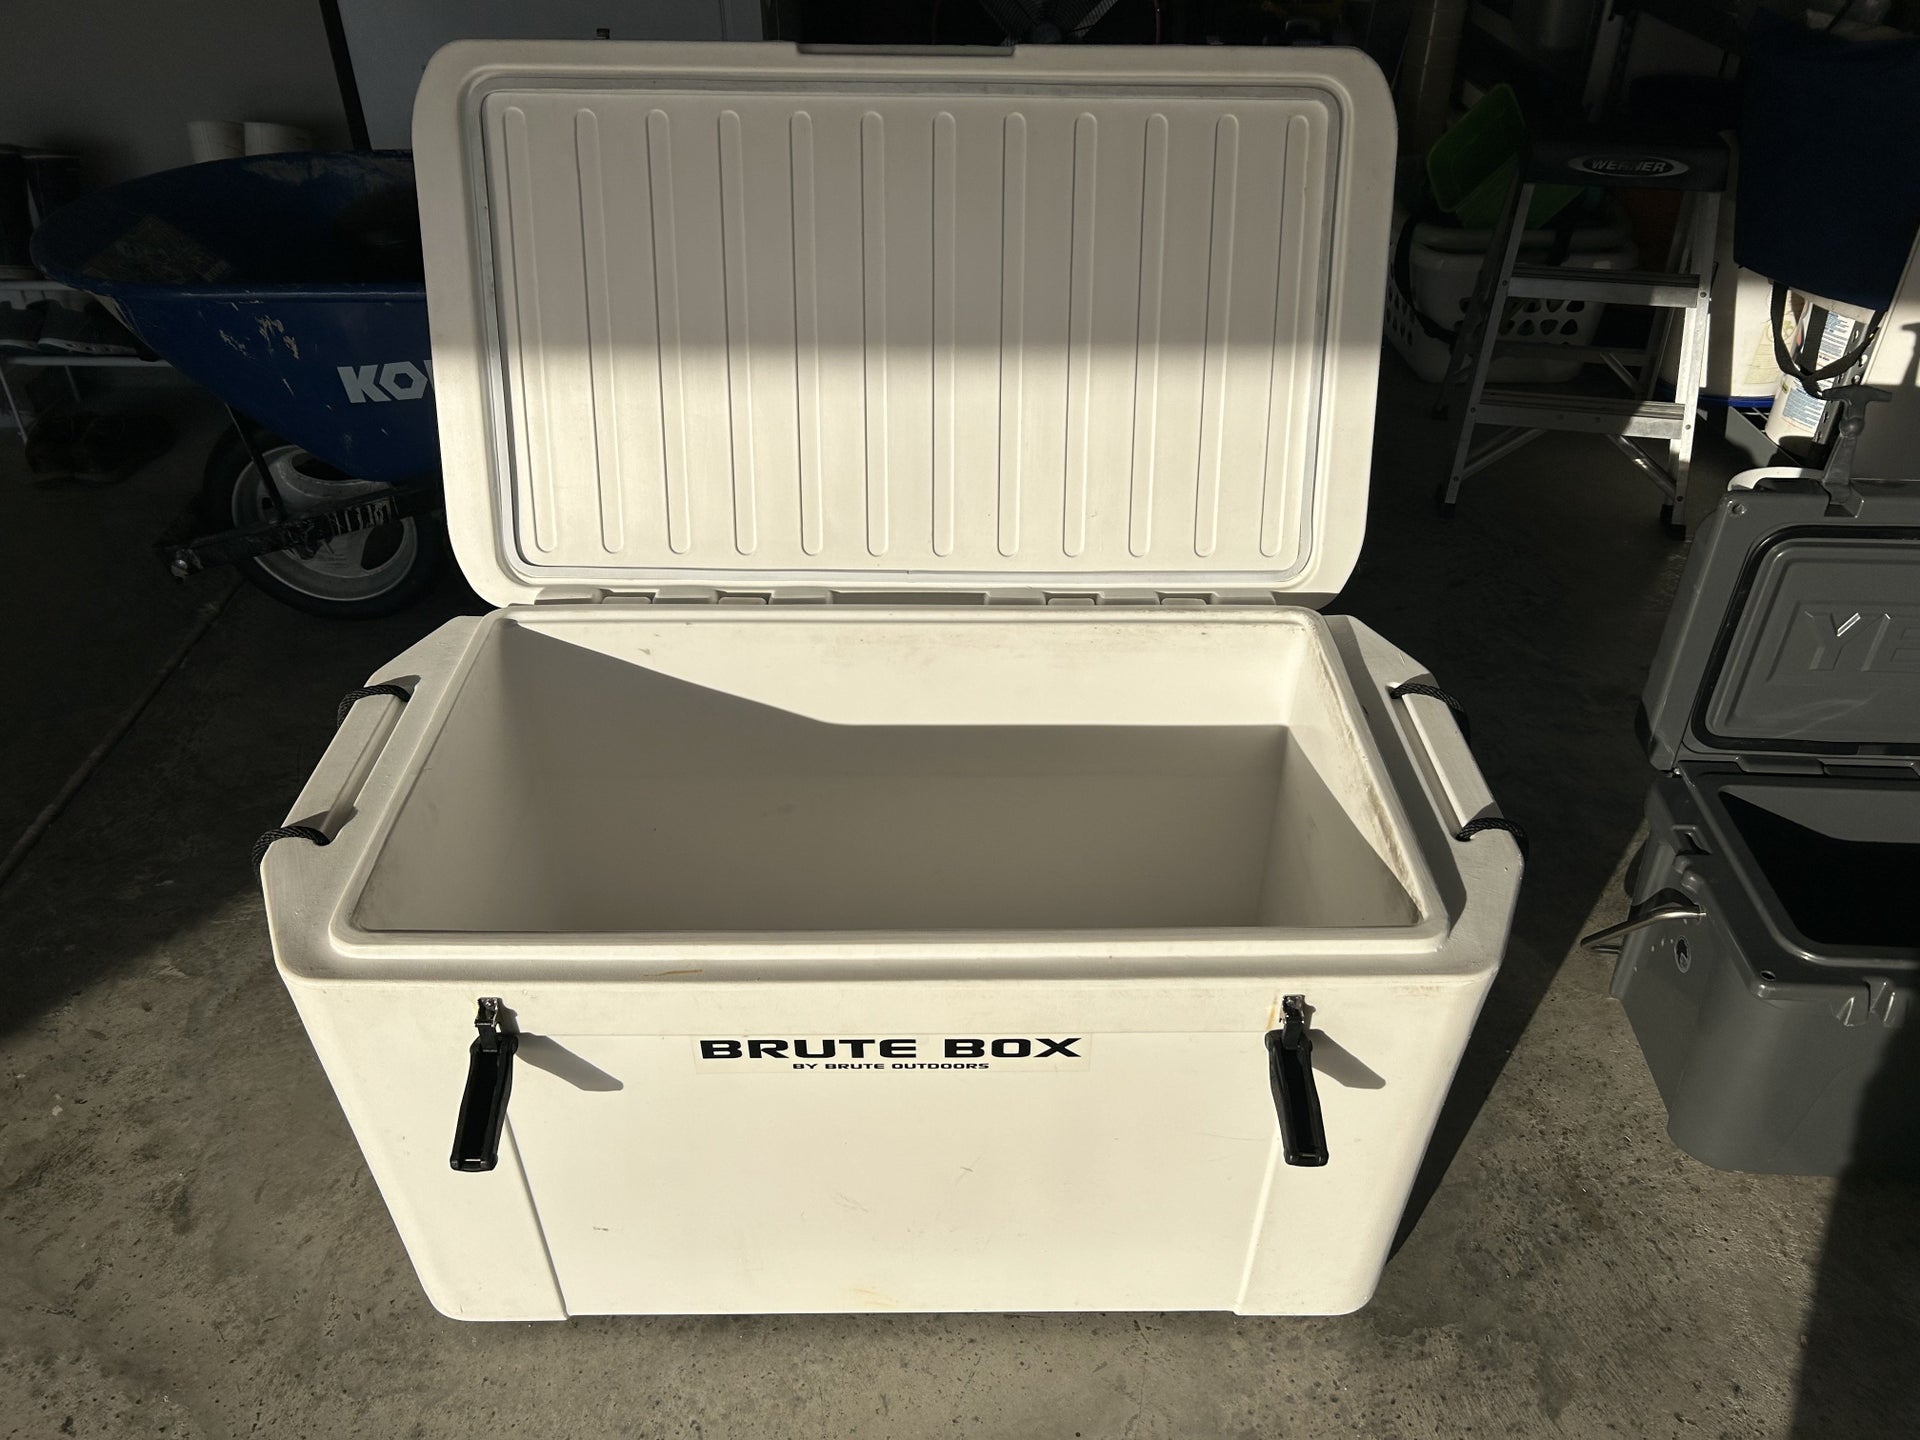 Brute Box and Yeti coolers - SOLD